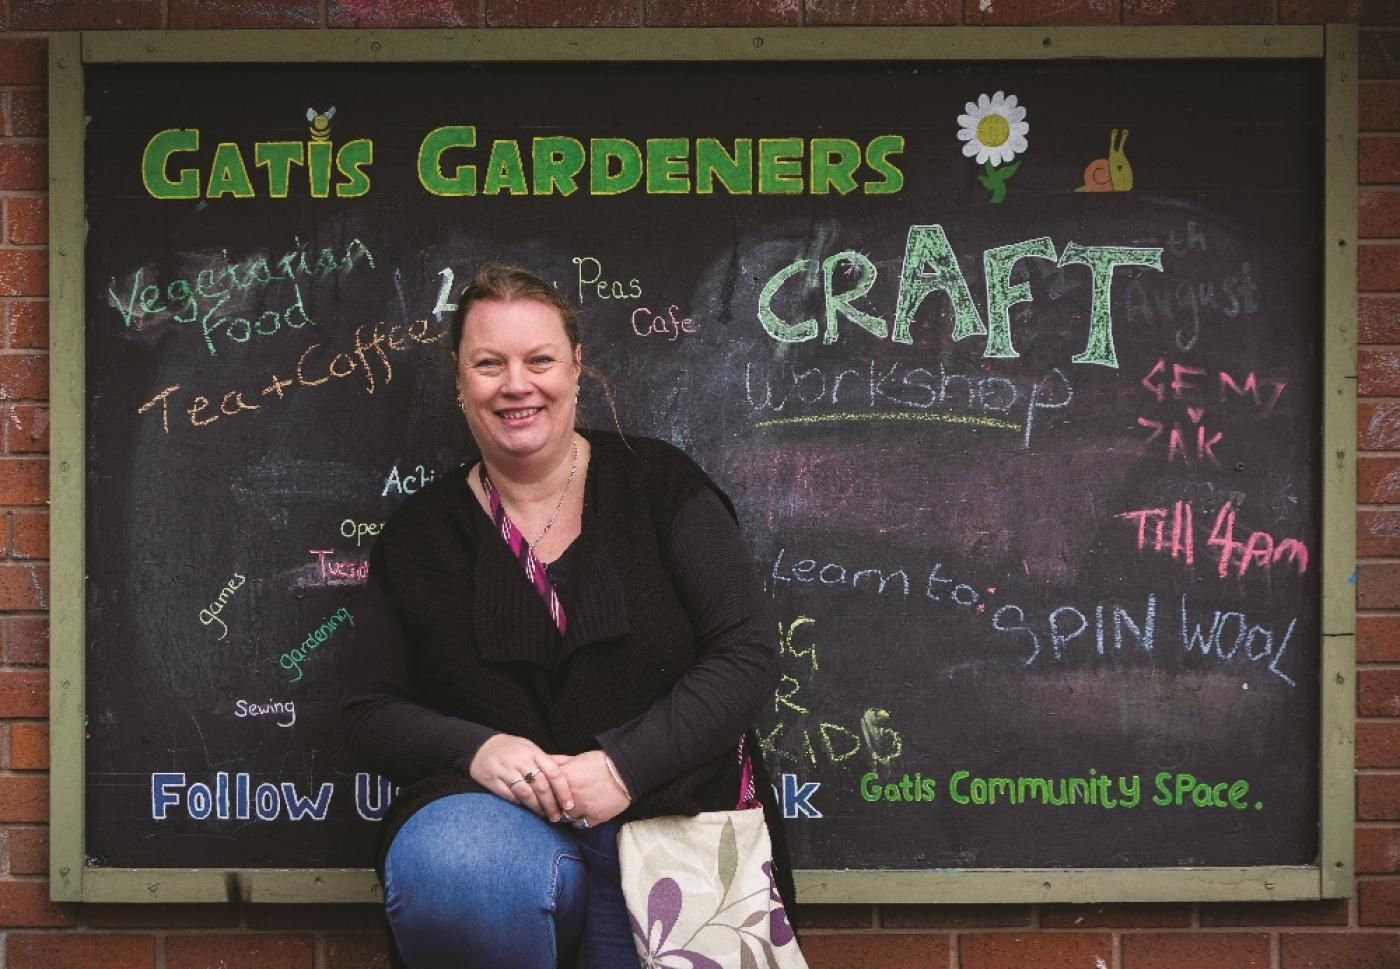 Woman standing in front of chalkboard titled 'Gatis Gardeners'